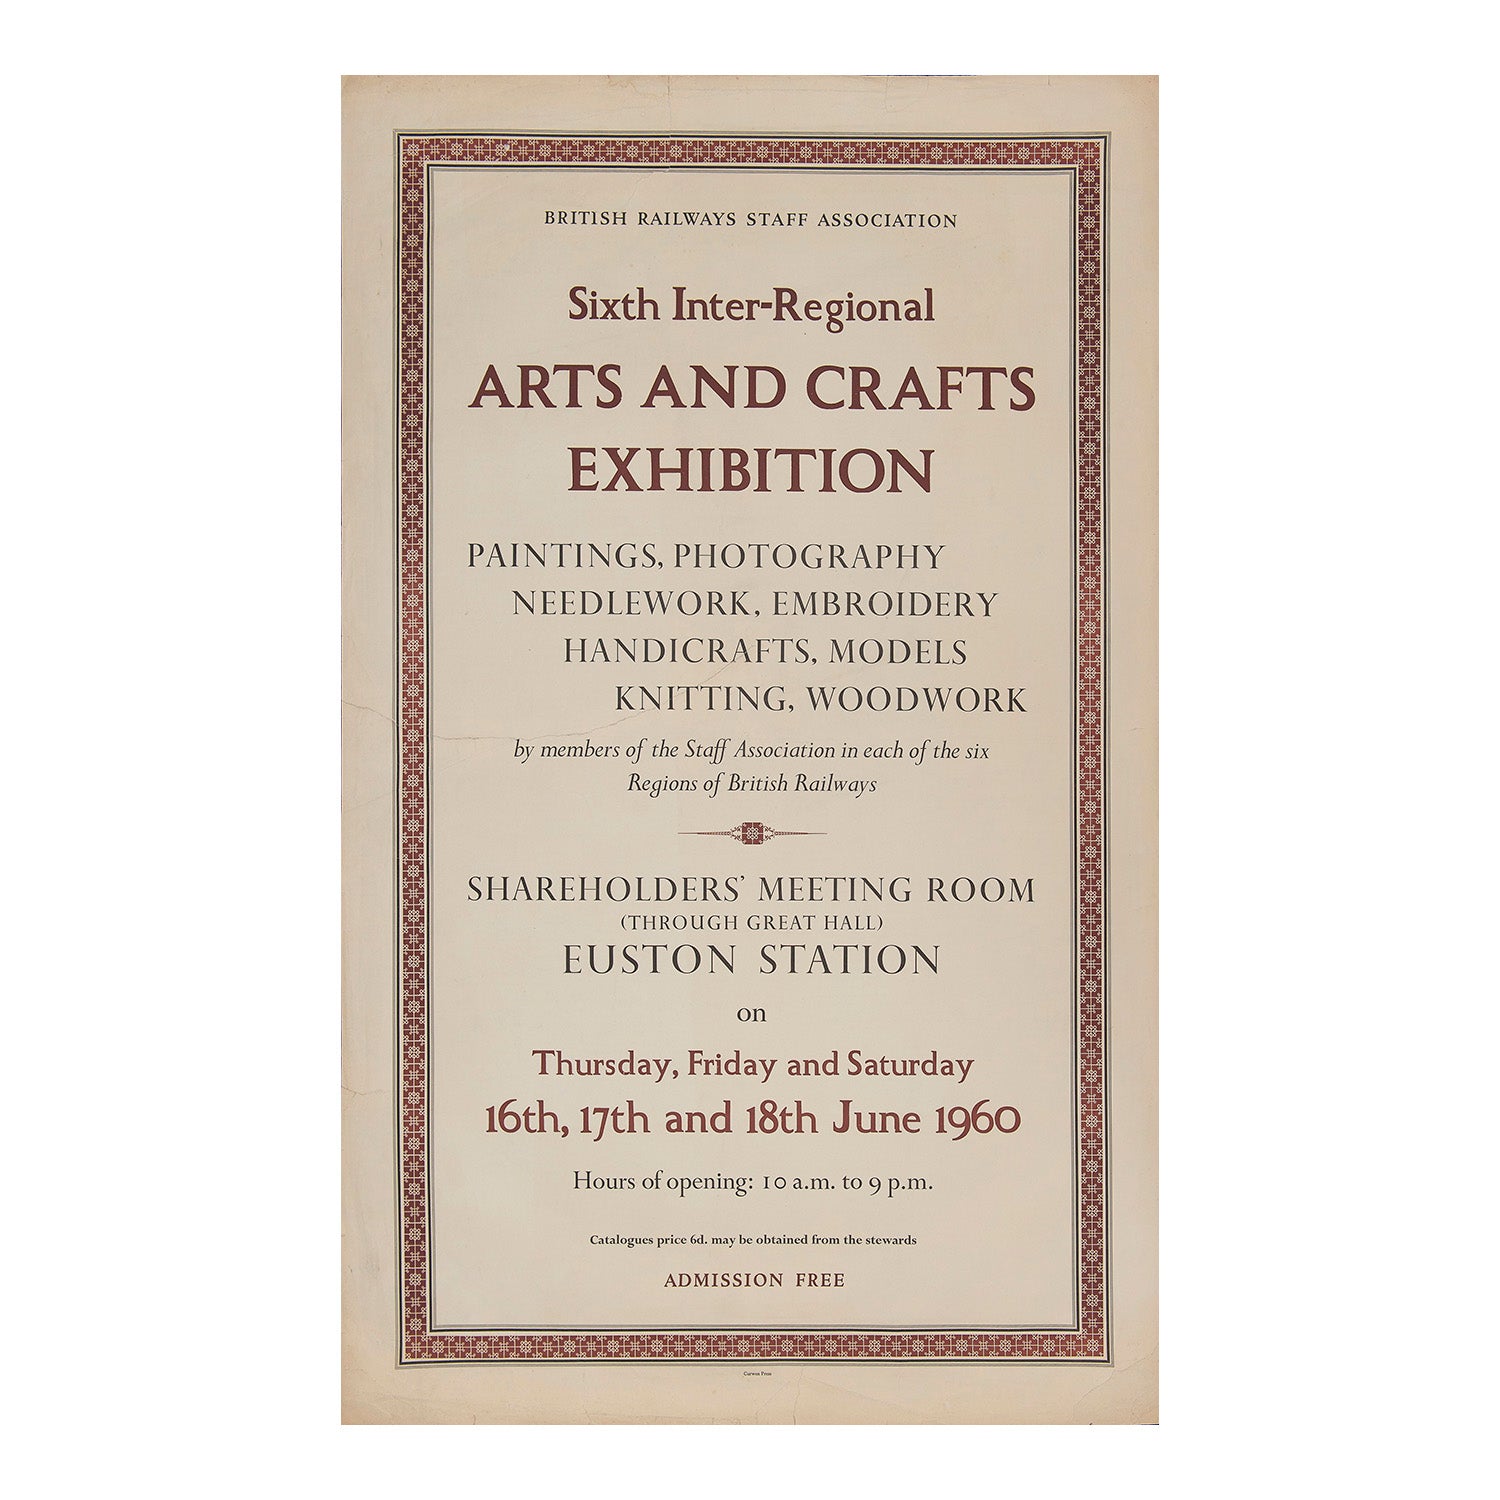 British Railways Staff Association poster for the Sixth Inter-Regional Arts and Crafts Exhibition, 1960. Designed and printed by the Curwen Press, with distinctive decorative border. 